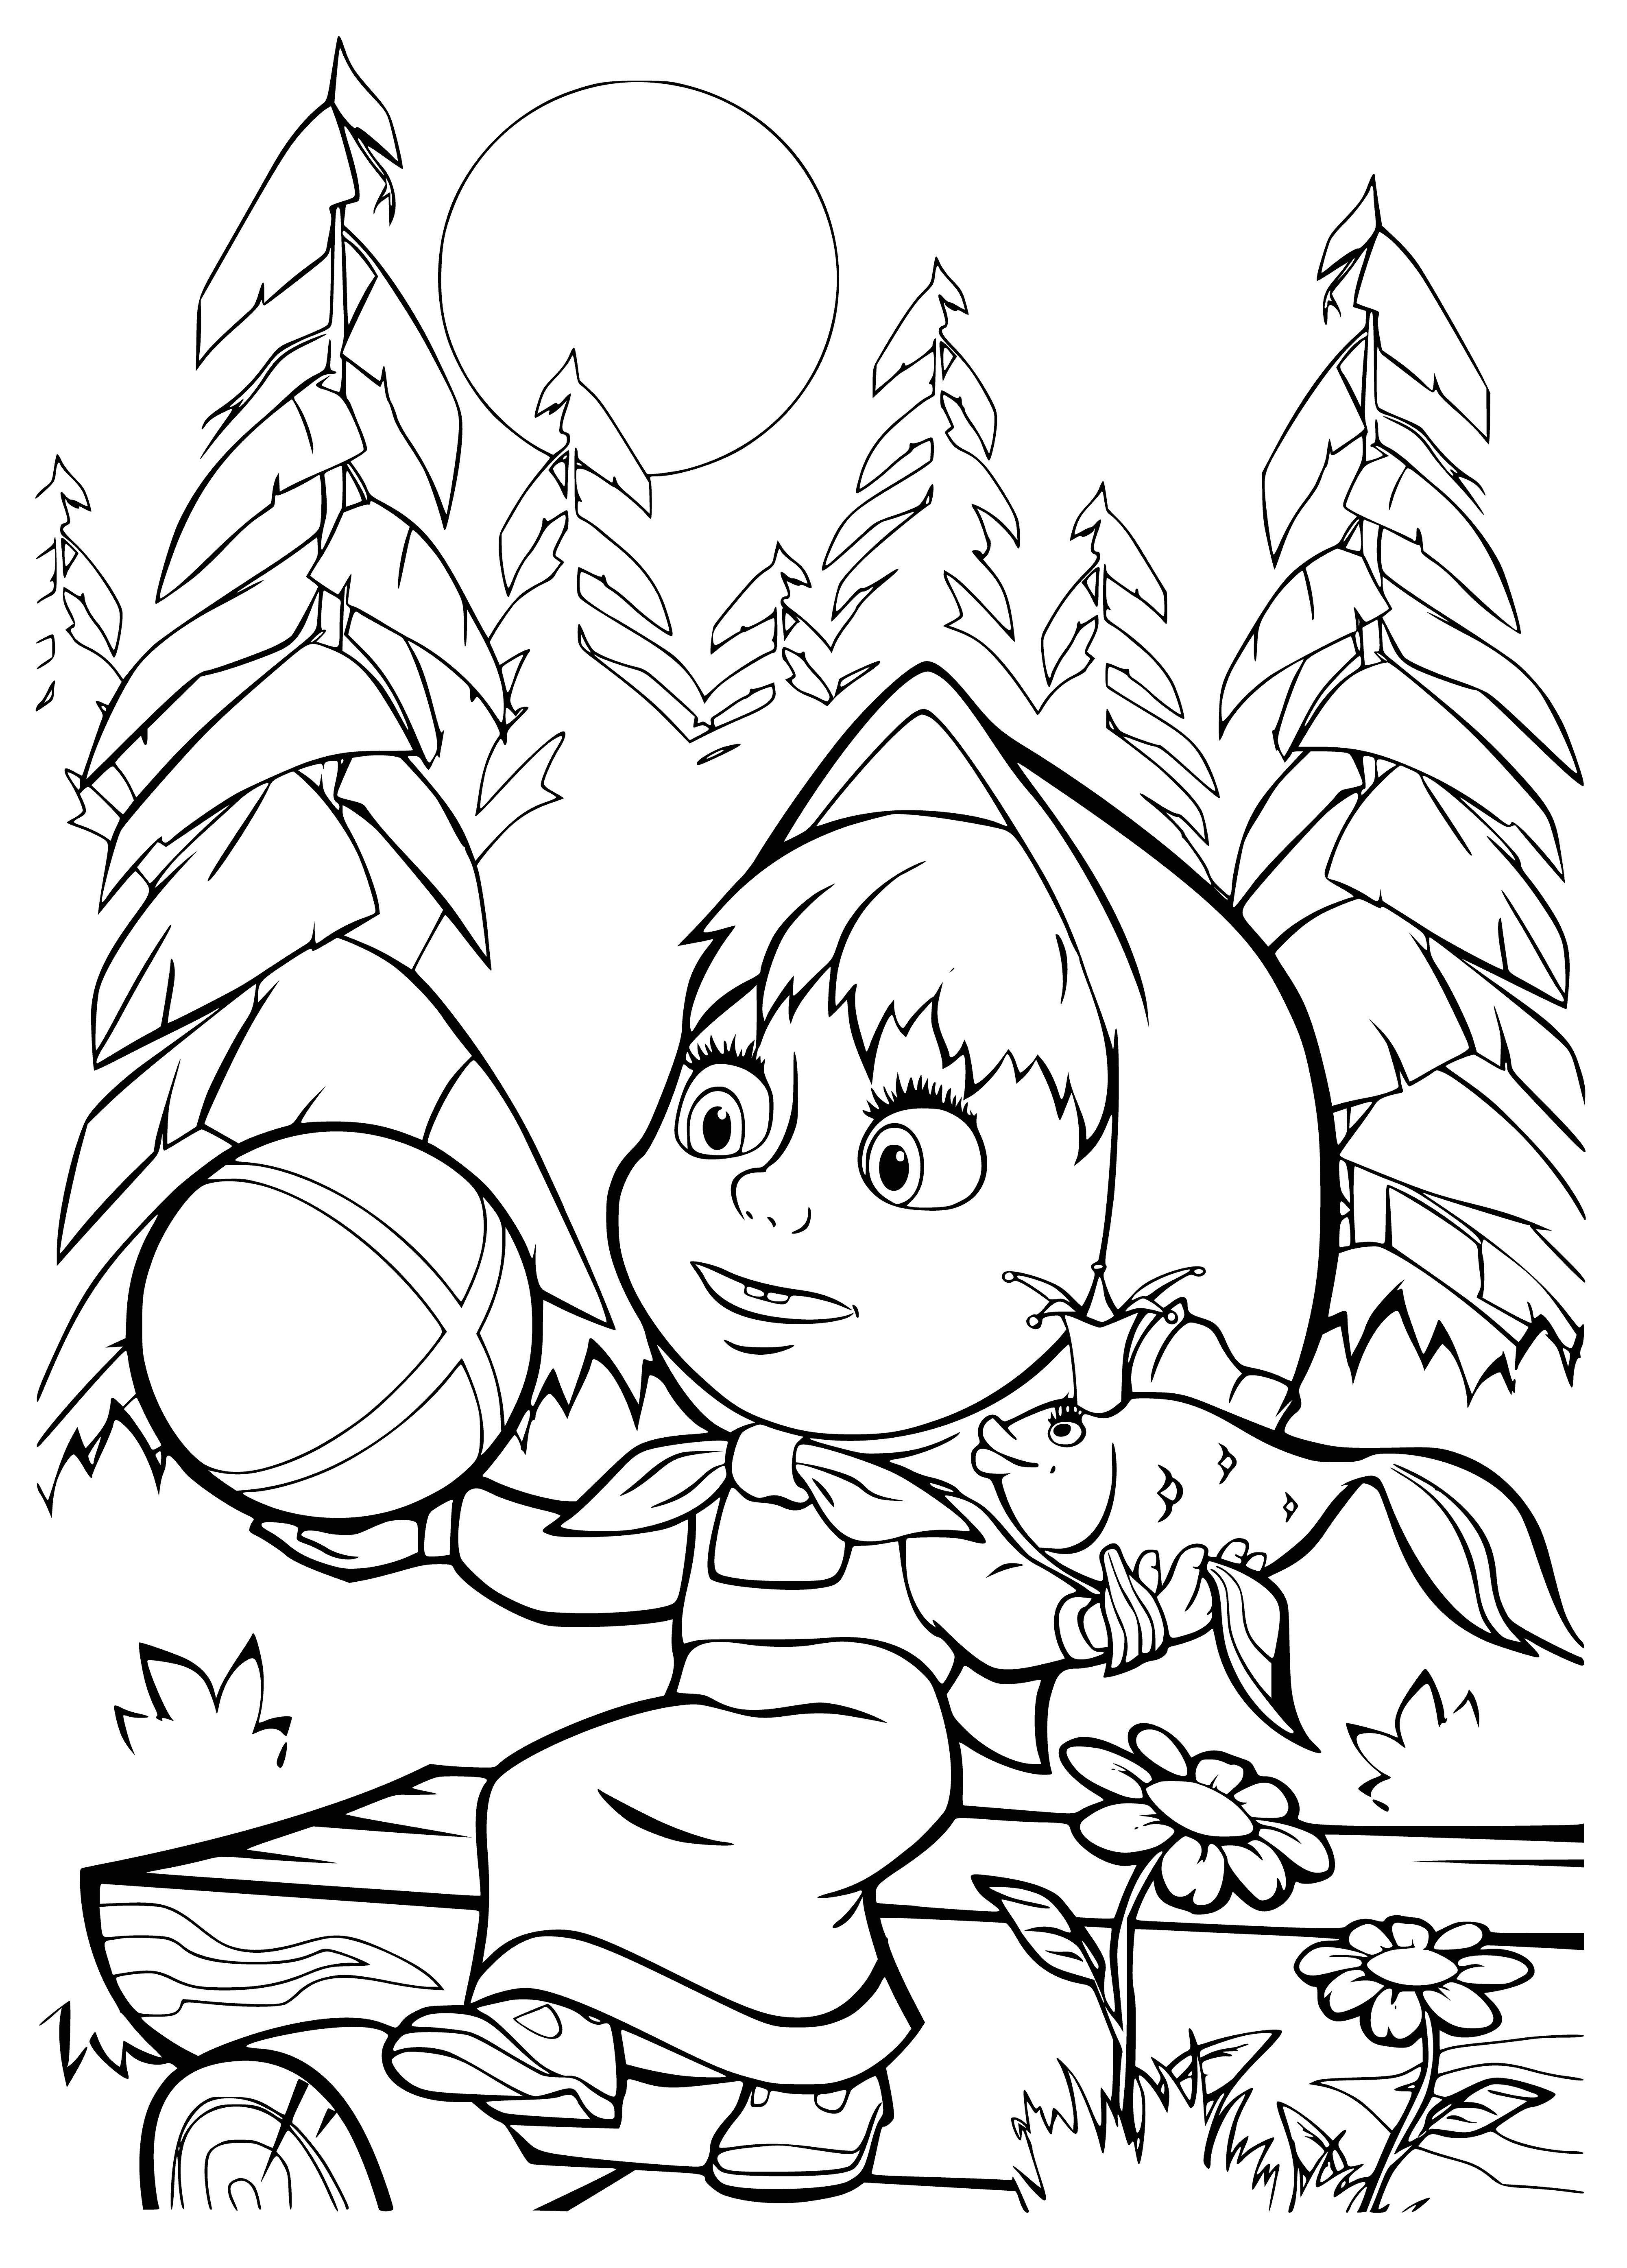 coloring page: Masha holds a small ball and looks up to the bear, ready to make a wish.